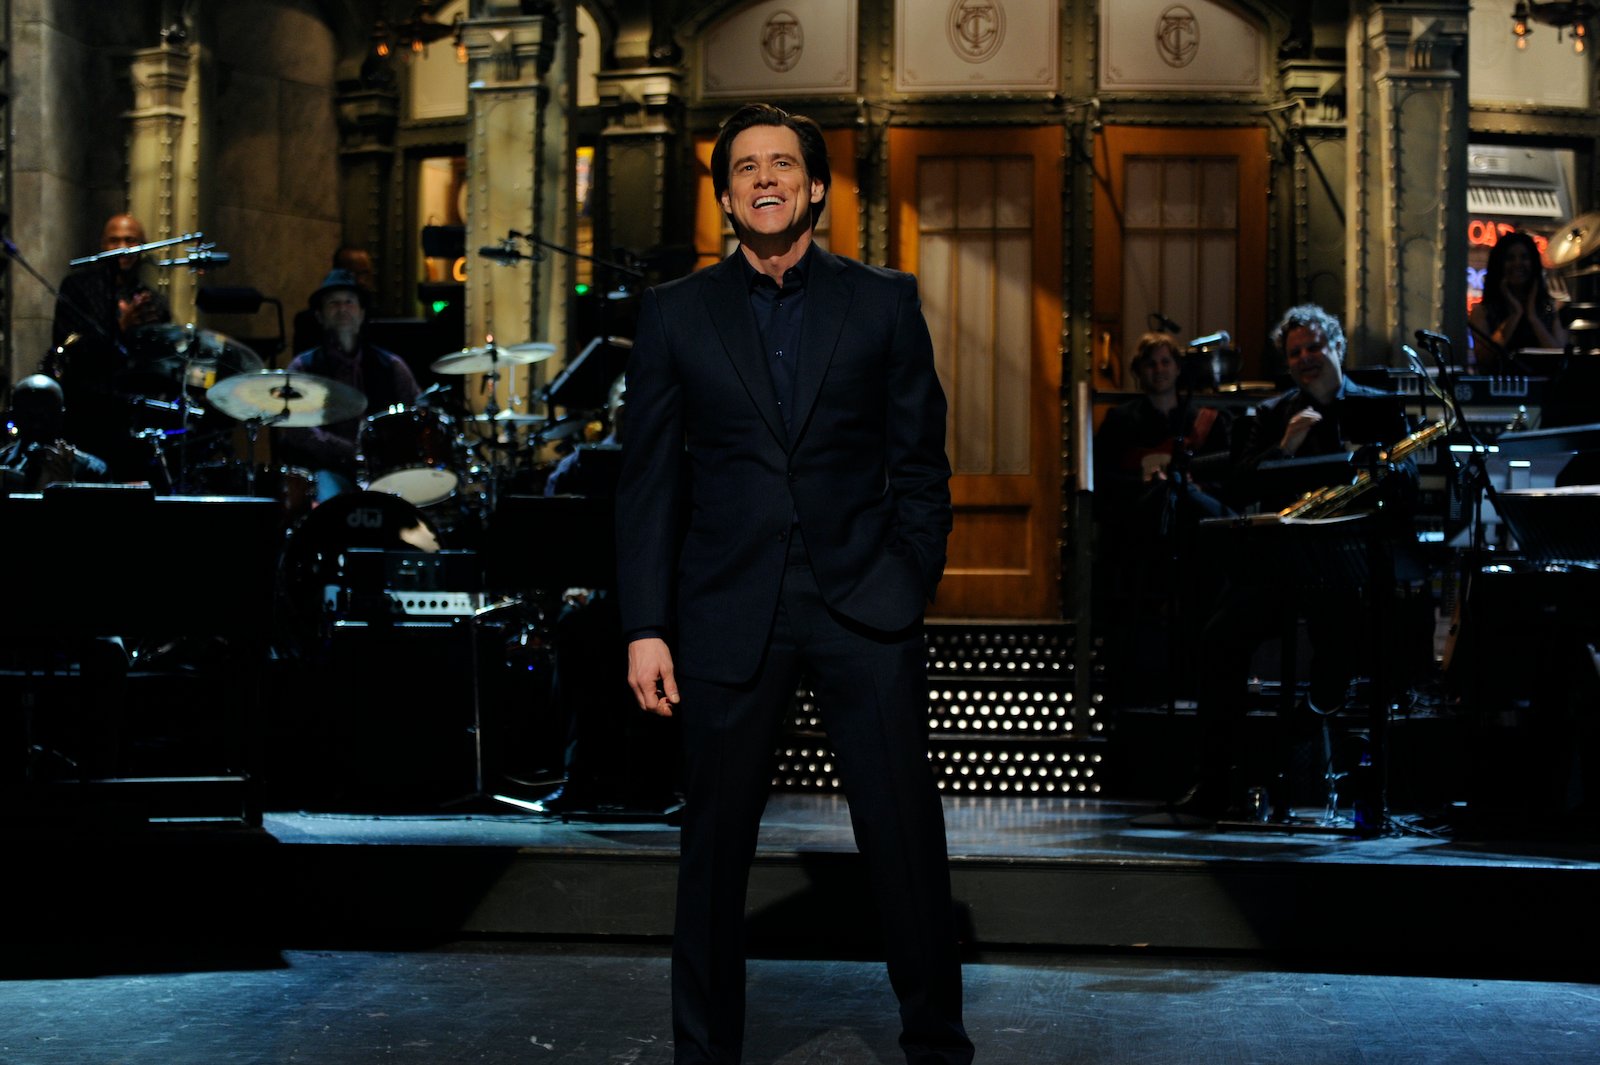 Jim Carrey hosting SNL, smiling and wearing a black suit on stage.